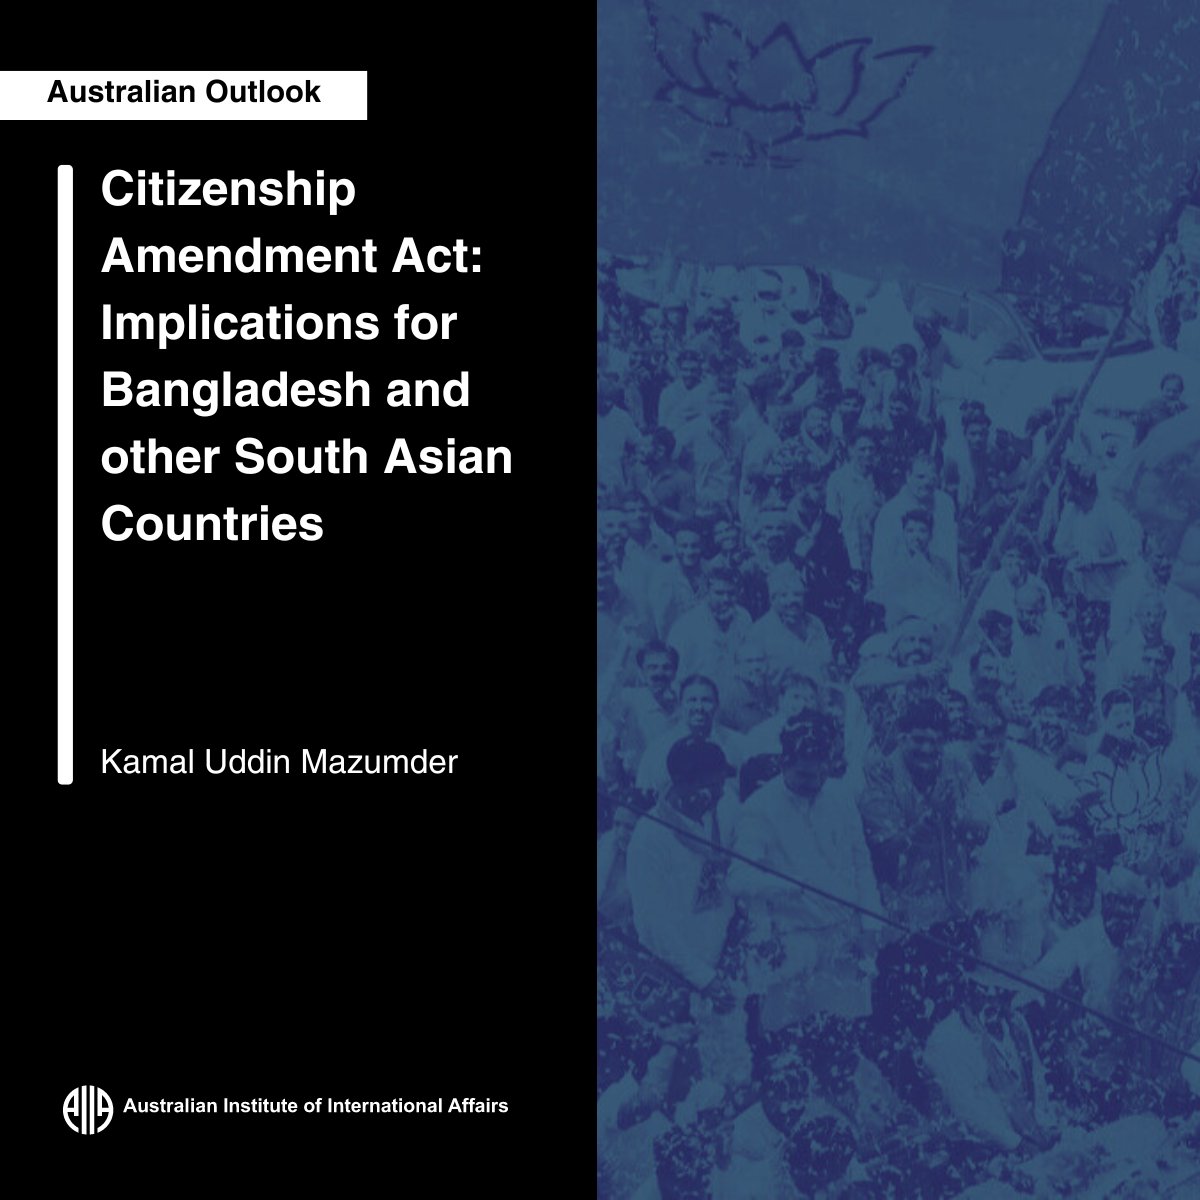 “The CAA act...remains to be seen what ripple effects that may have within and outside India,” discussed by Kamal Uddin Mazumder Read more at Australian Outlook👇 ow.ly/jlmm50R8SYx